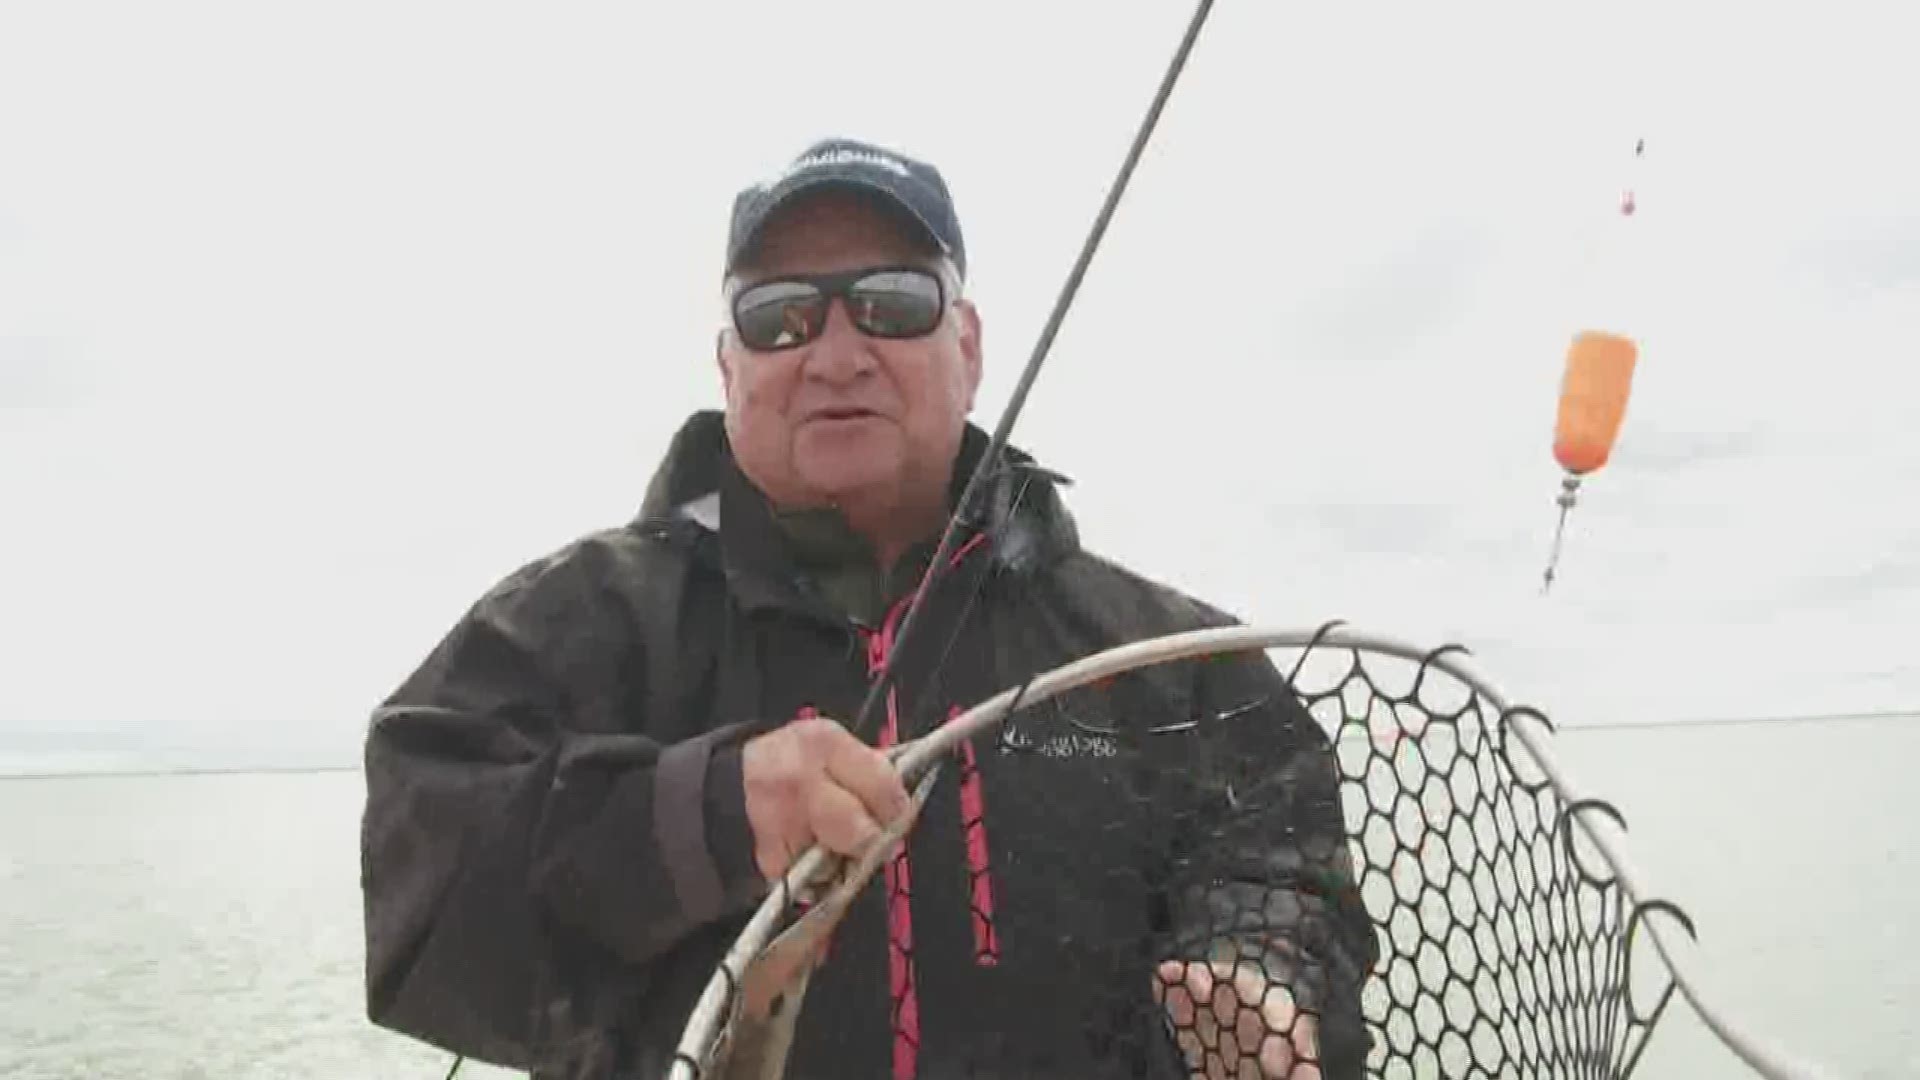 Rain, high winds and dirty water Thursday morning discouraged a lot fishermen, but not Don Dubuc. He waited out the rain and found success at Delacroix Island.